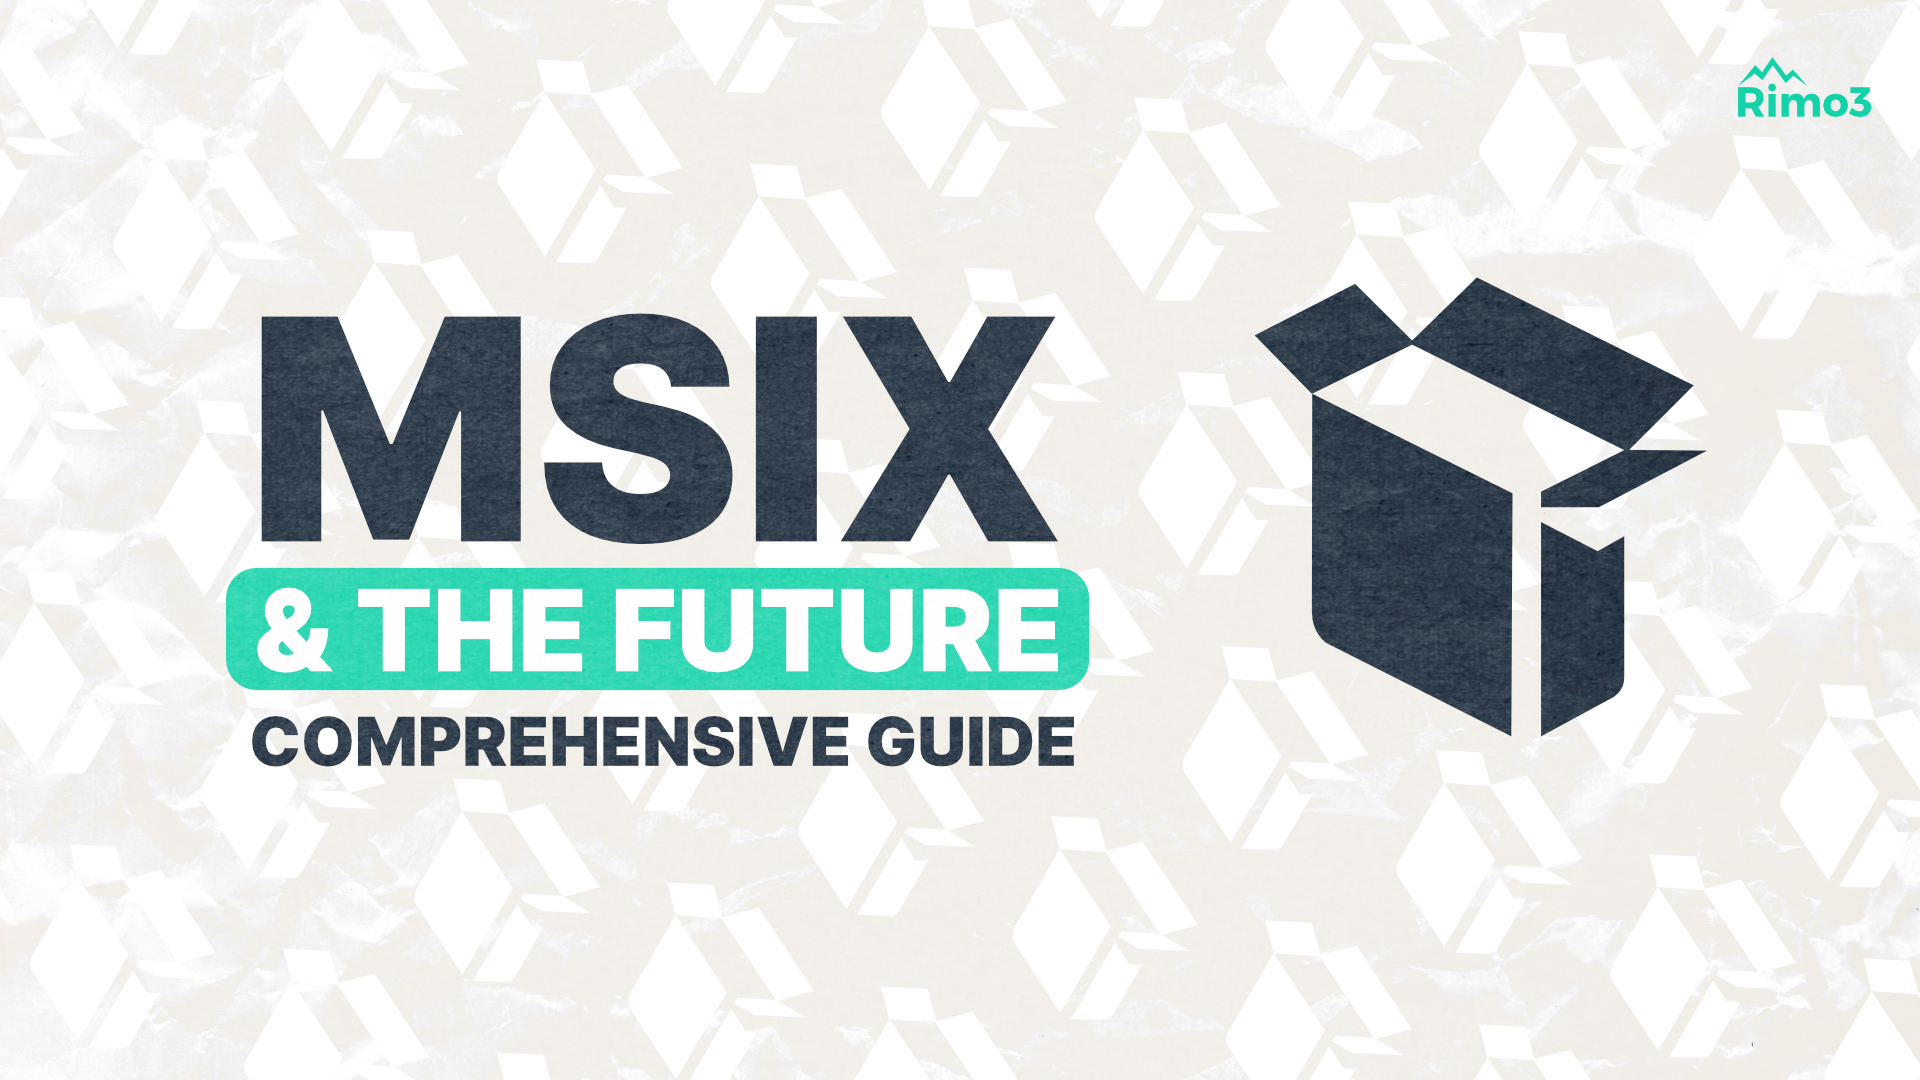 A Comprehensive Guide to MSIX and Its Future